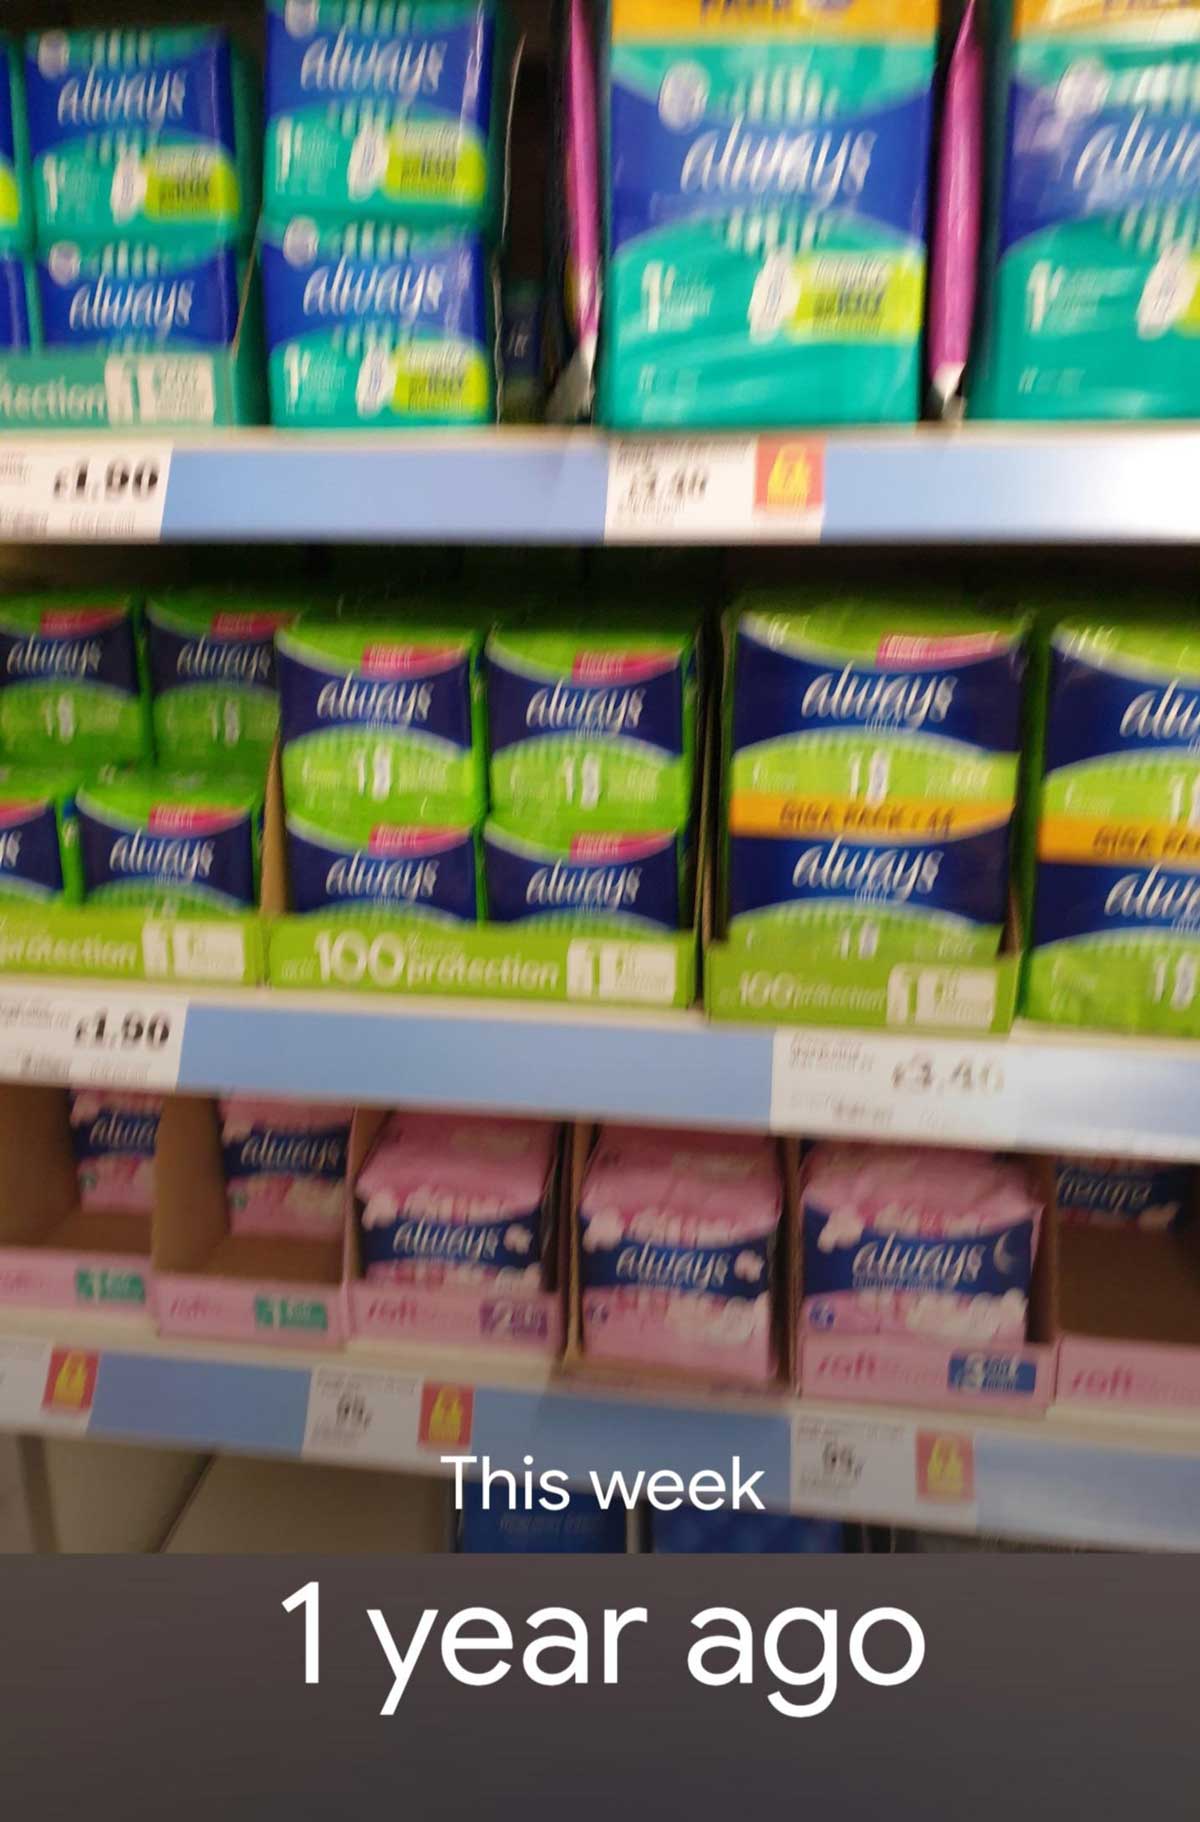 My phone sent me a one year anniversary reminder of the time I sent my wife a picture of the sanitary products, as I couldn't remember which one to buy